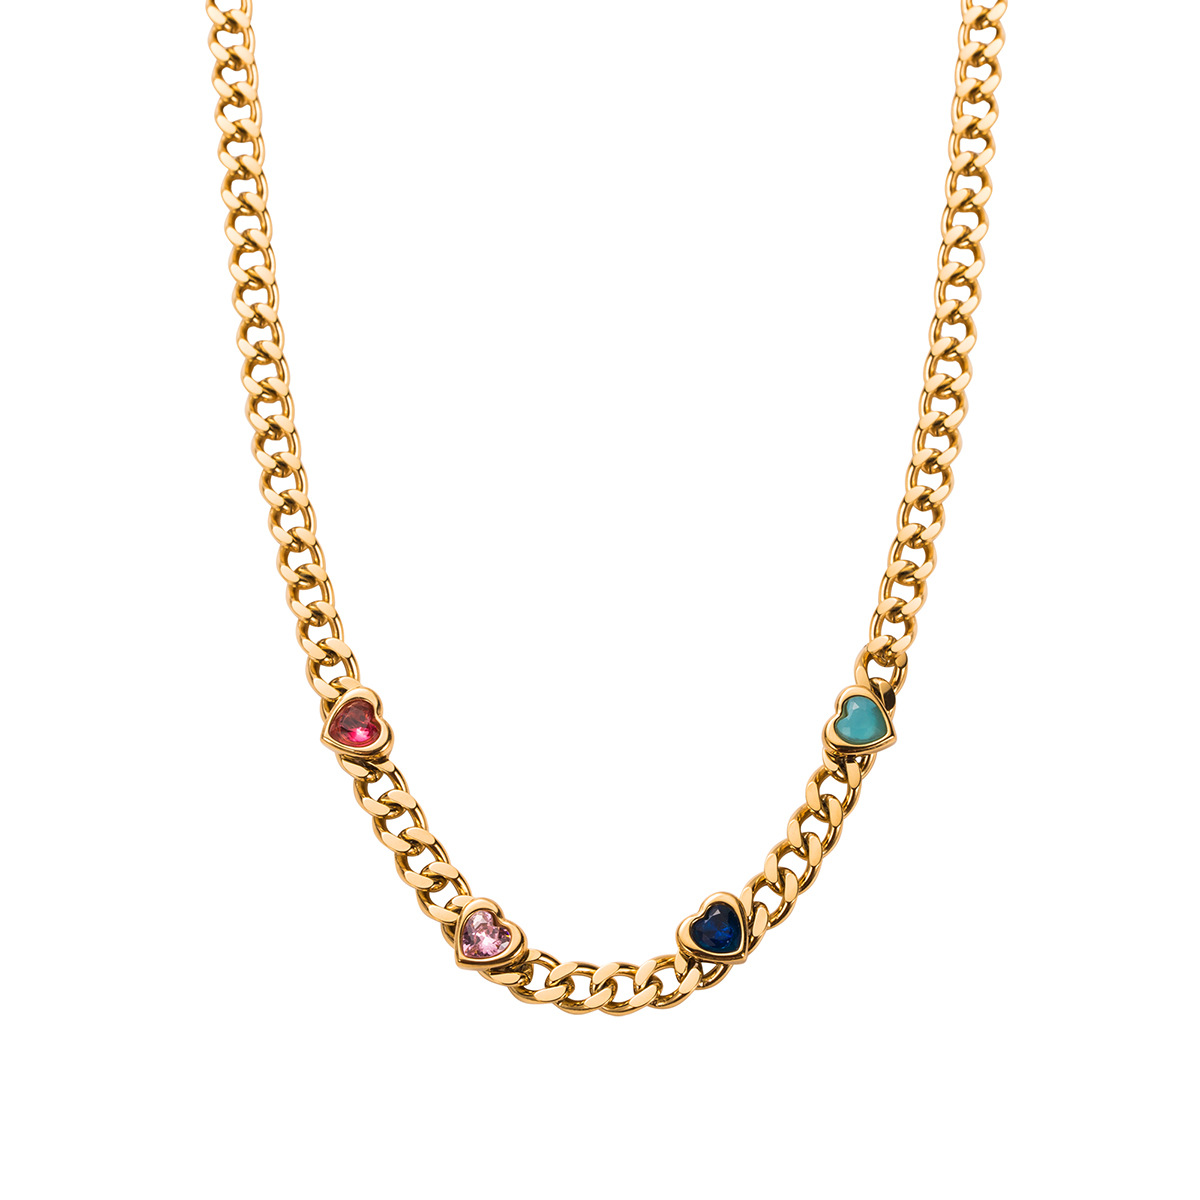 B necklace 16-18inch